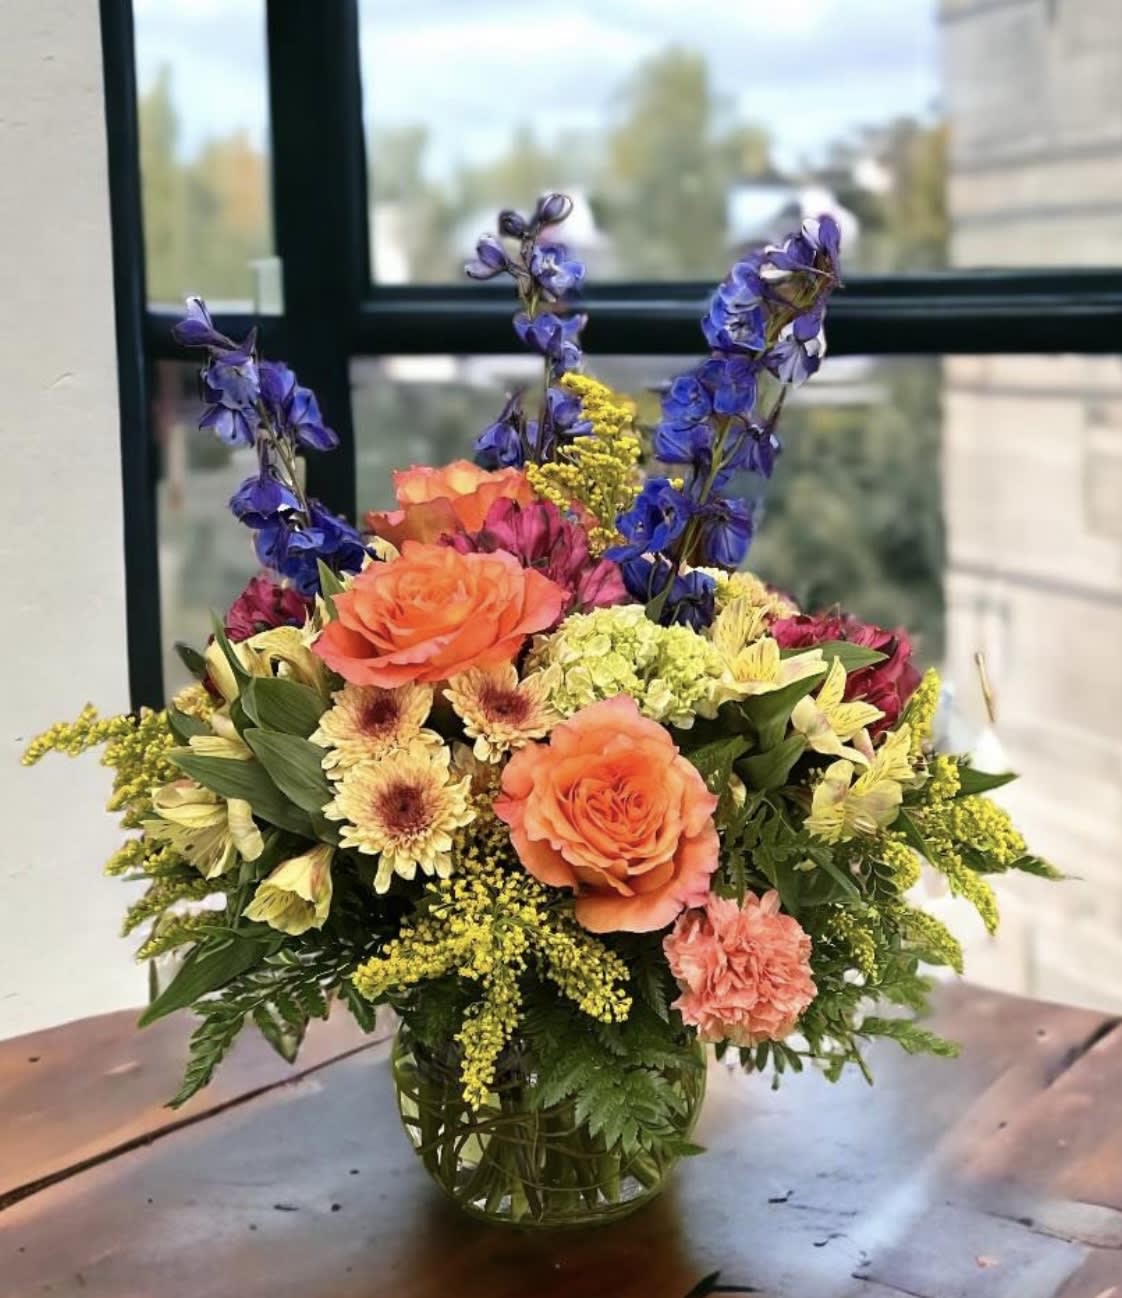 Mary Poppyins - This vibrant arrangement is like a spoon full of sugar for the eyes! Sure to brighten your loved ones day!